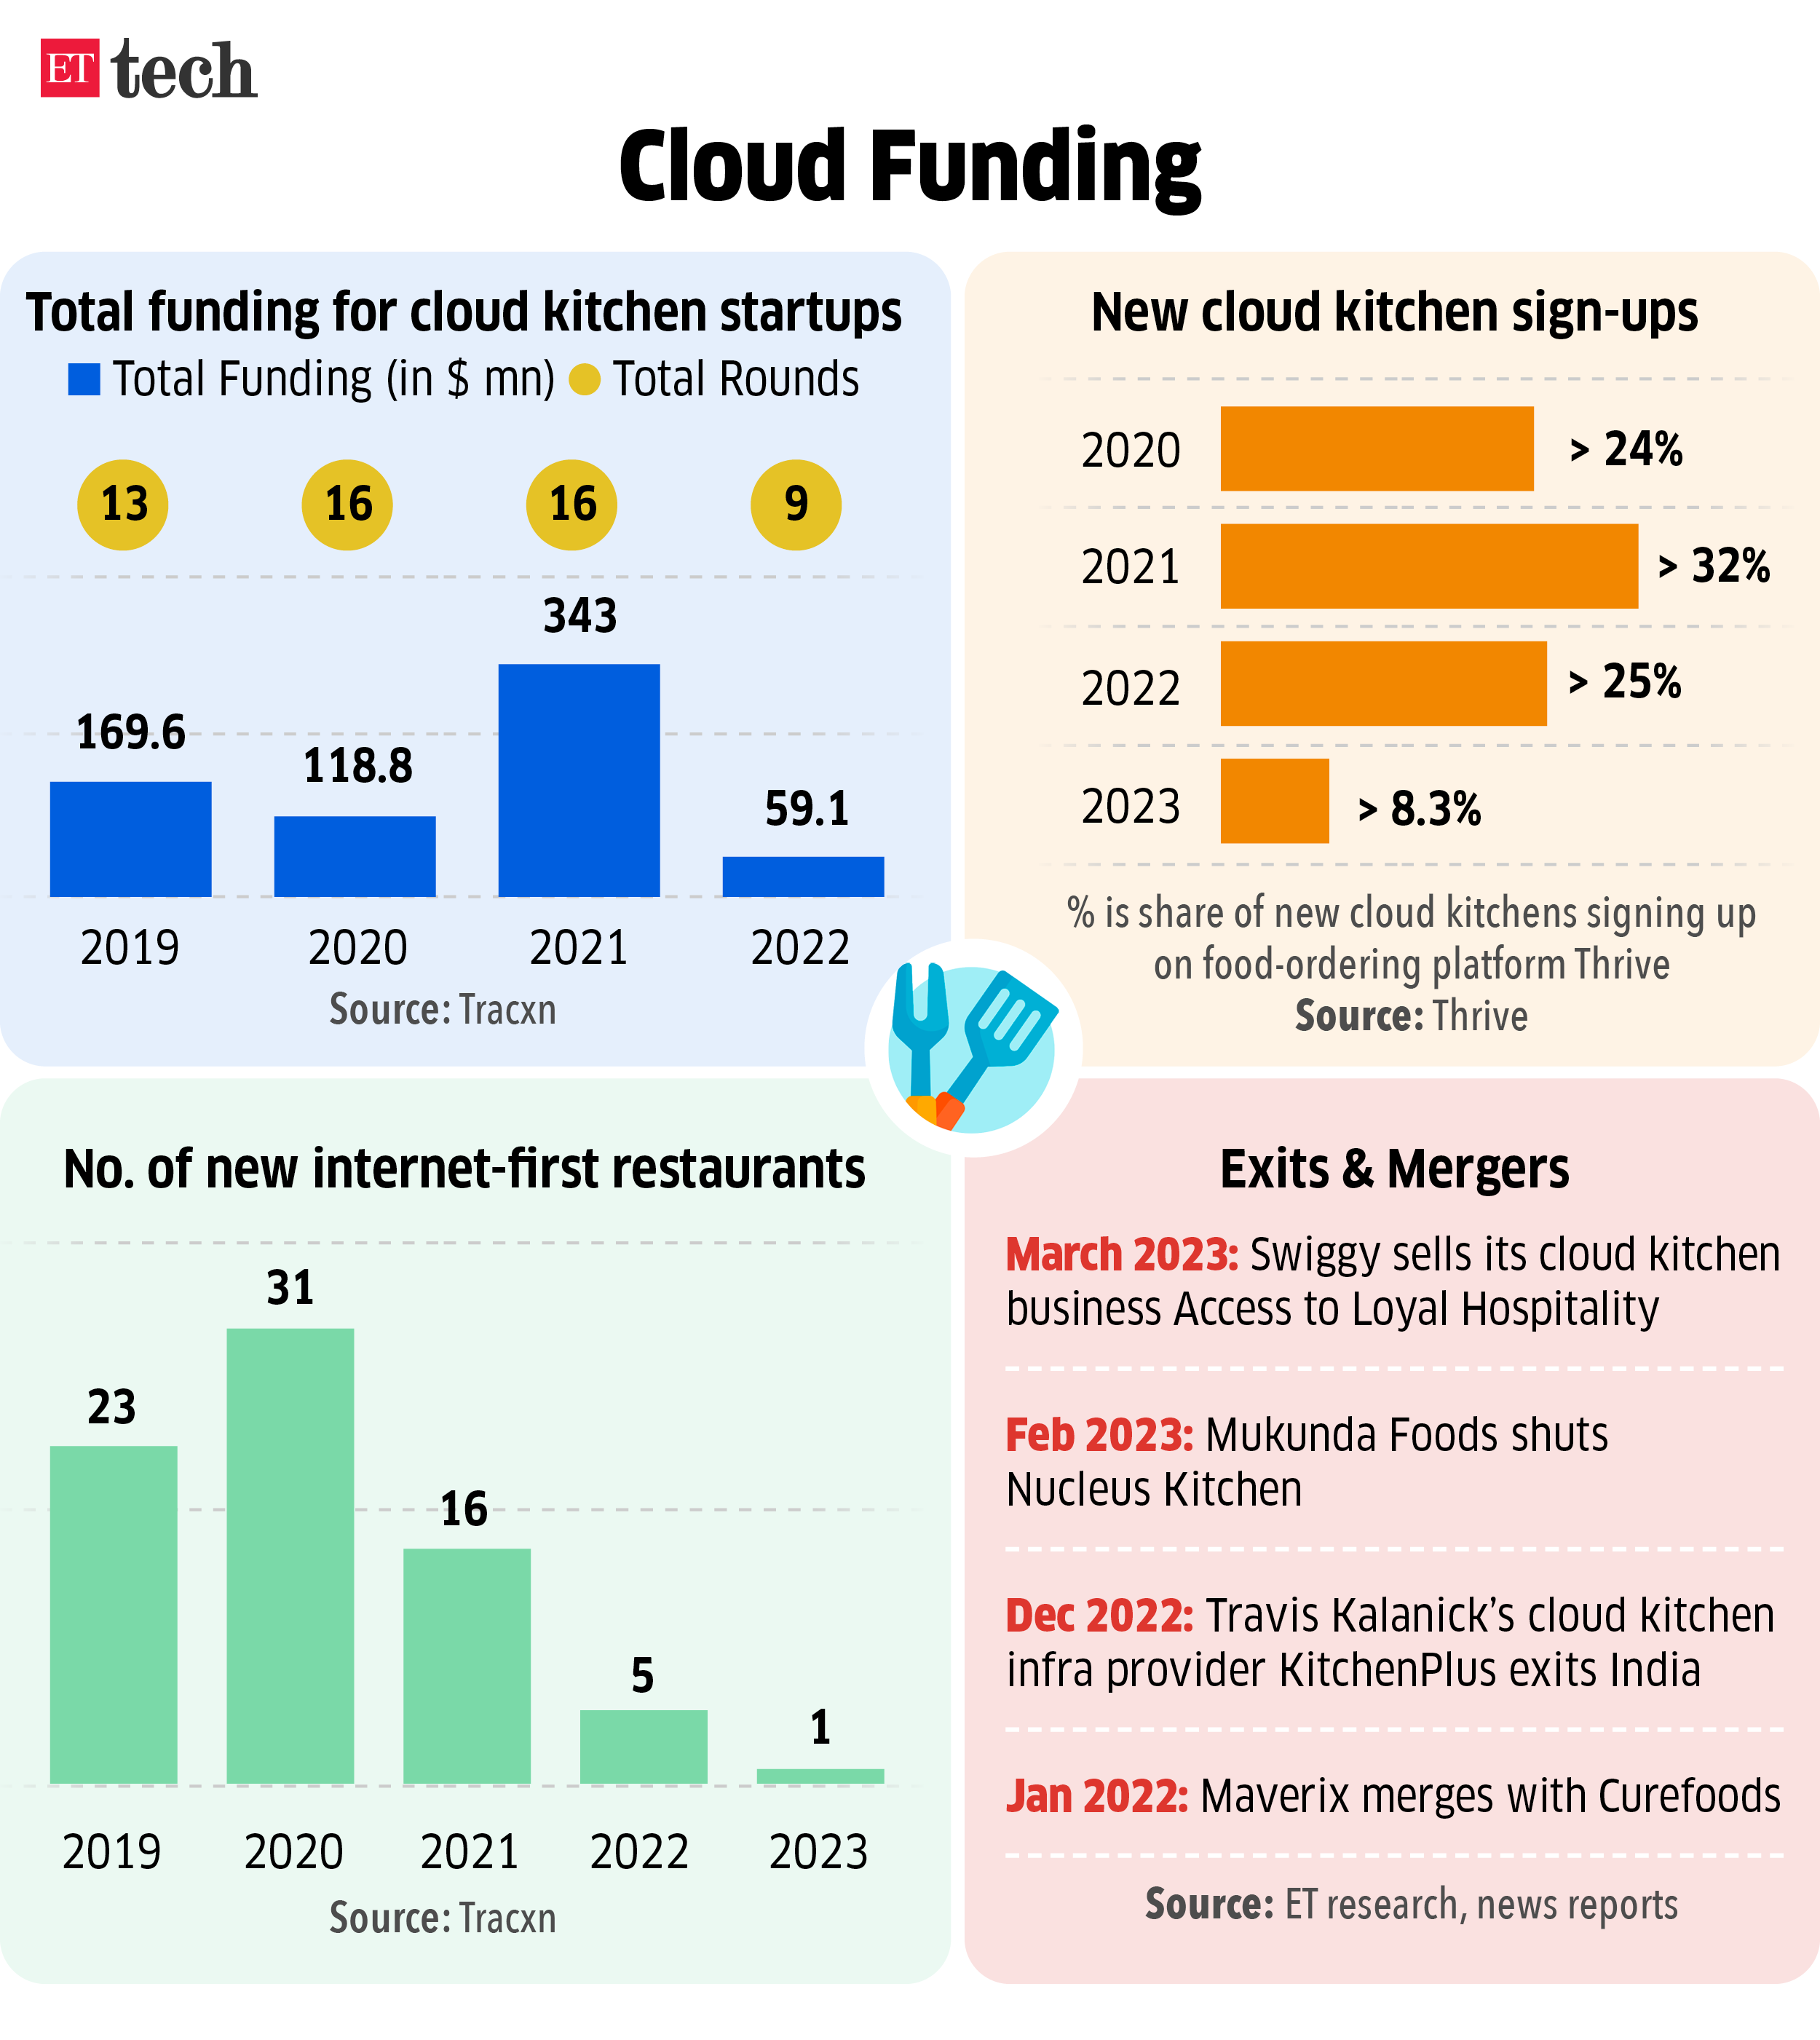 Cloud kitchens and new technologies in the new normal